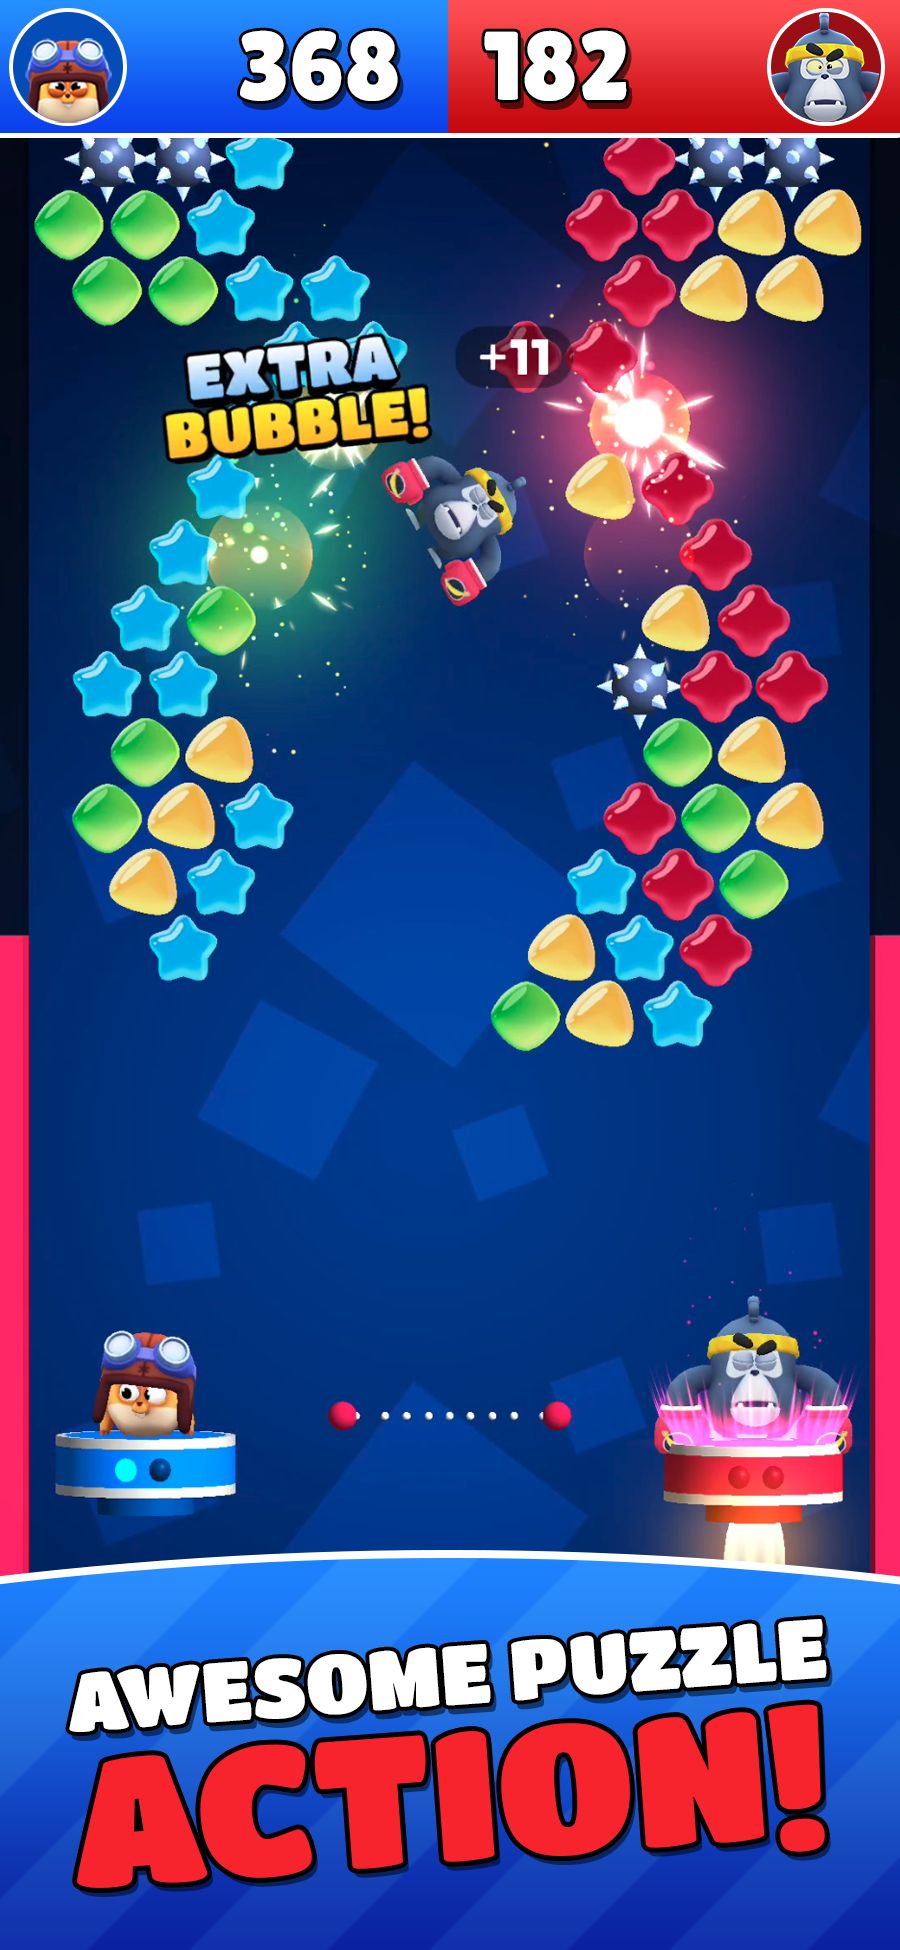 Gameplay of the Bubble Stars for Android phone or tablet.